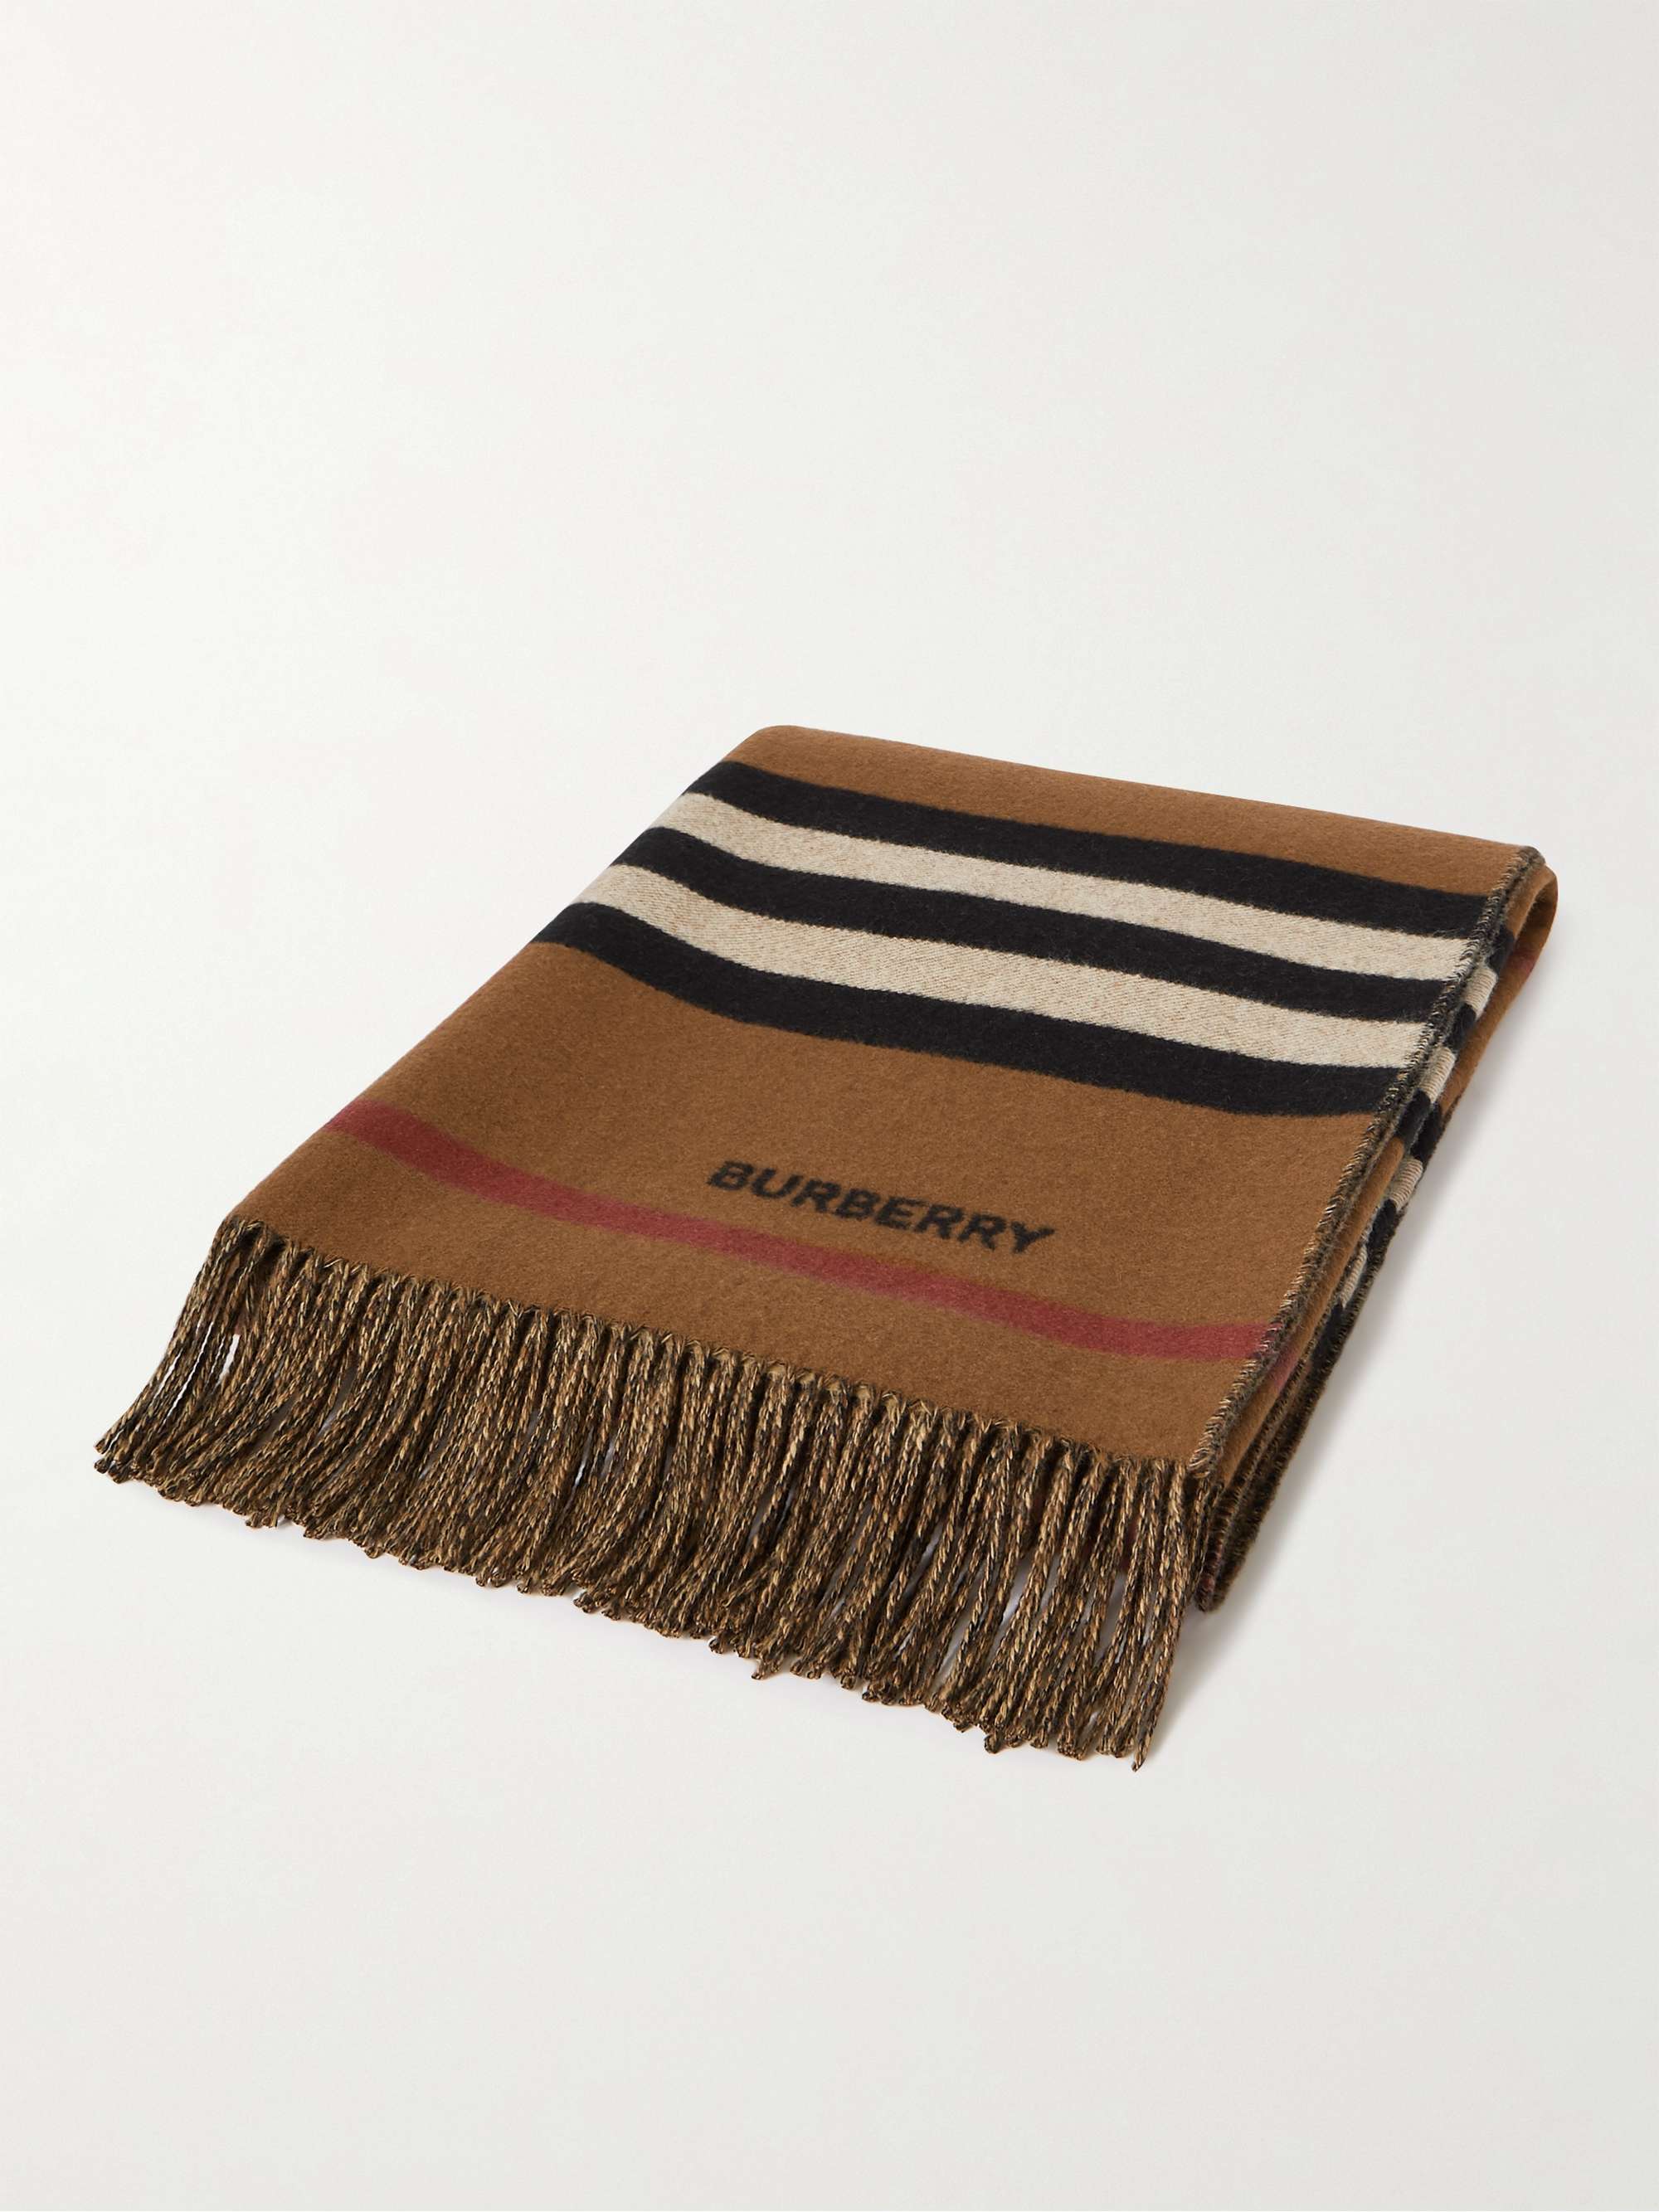 BURBERRY Fringed Striped Cashmere and Wool-Blend Blanket